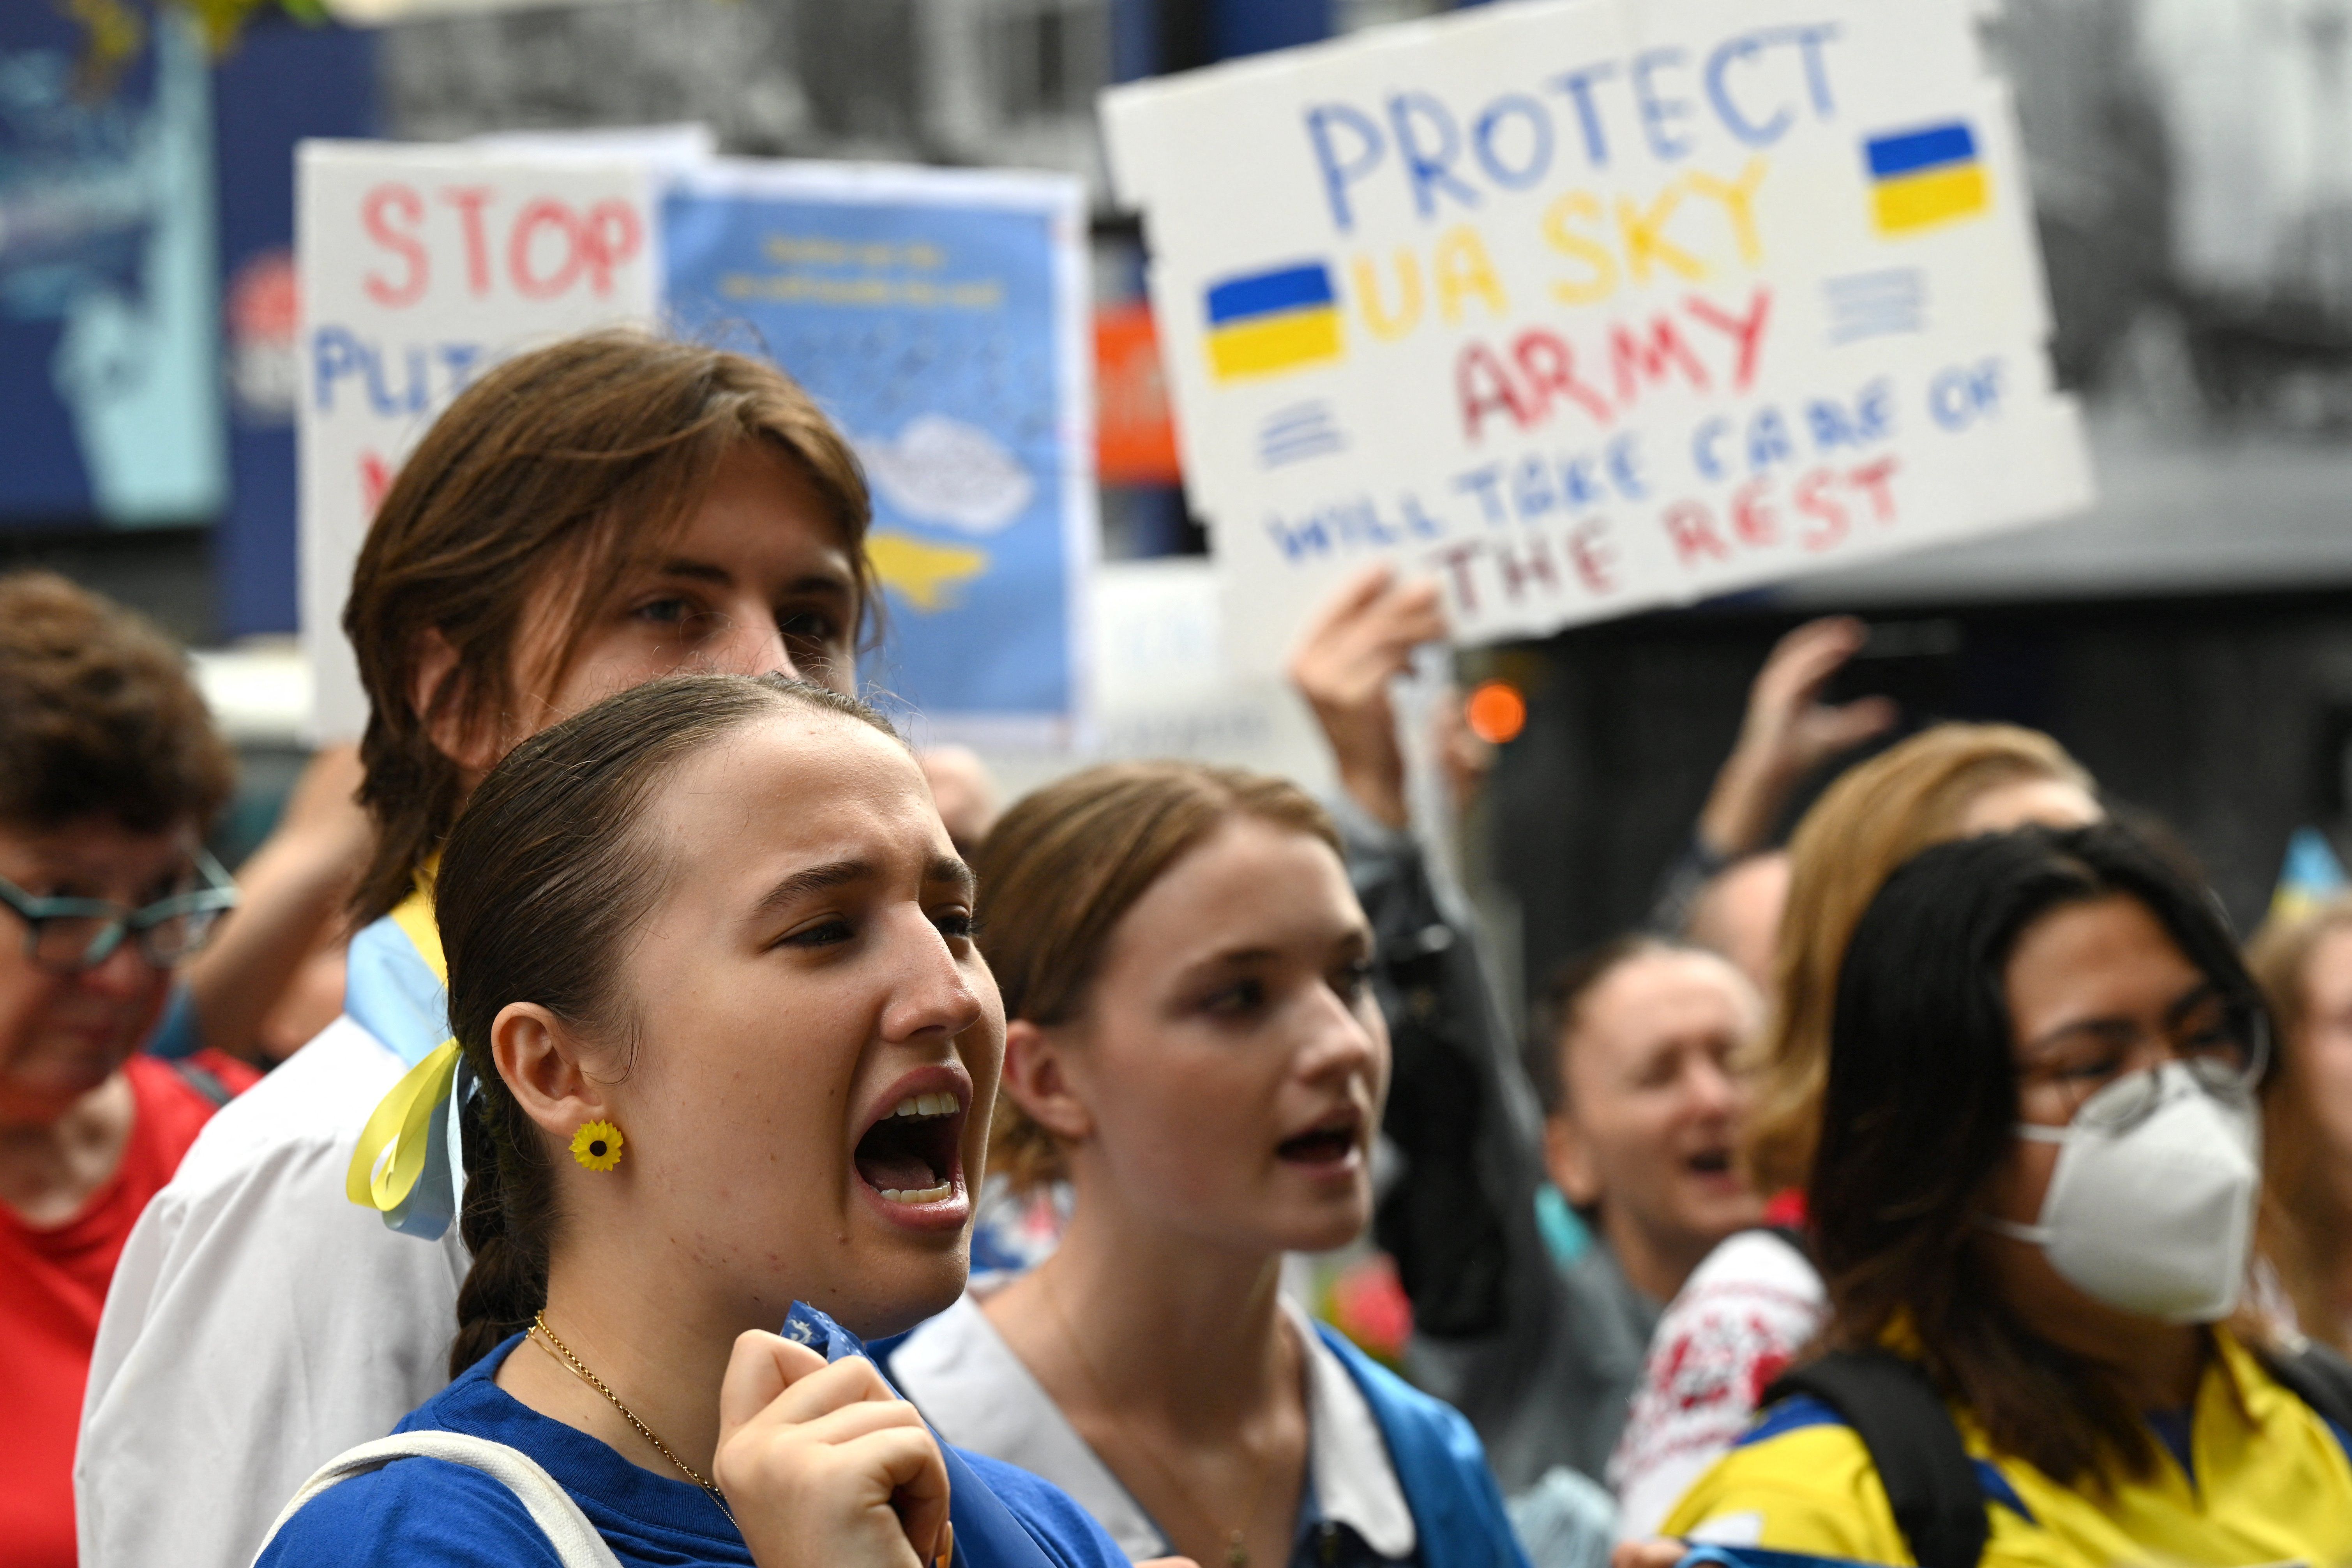 Protesters from Ukranian and Russian backgrounds shout slogans during a demonstration against the Russian invasion of Ukraine in Sydney on February 25